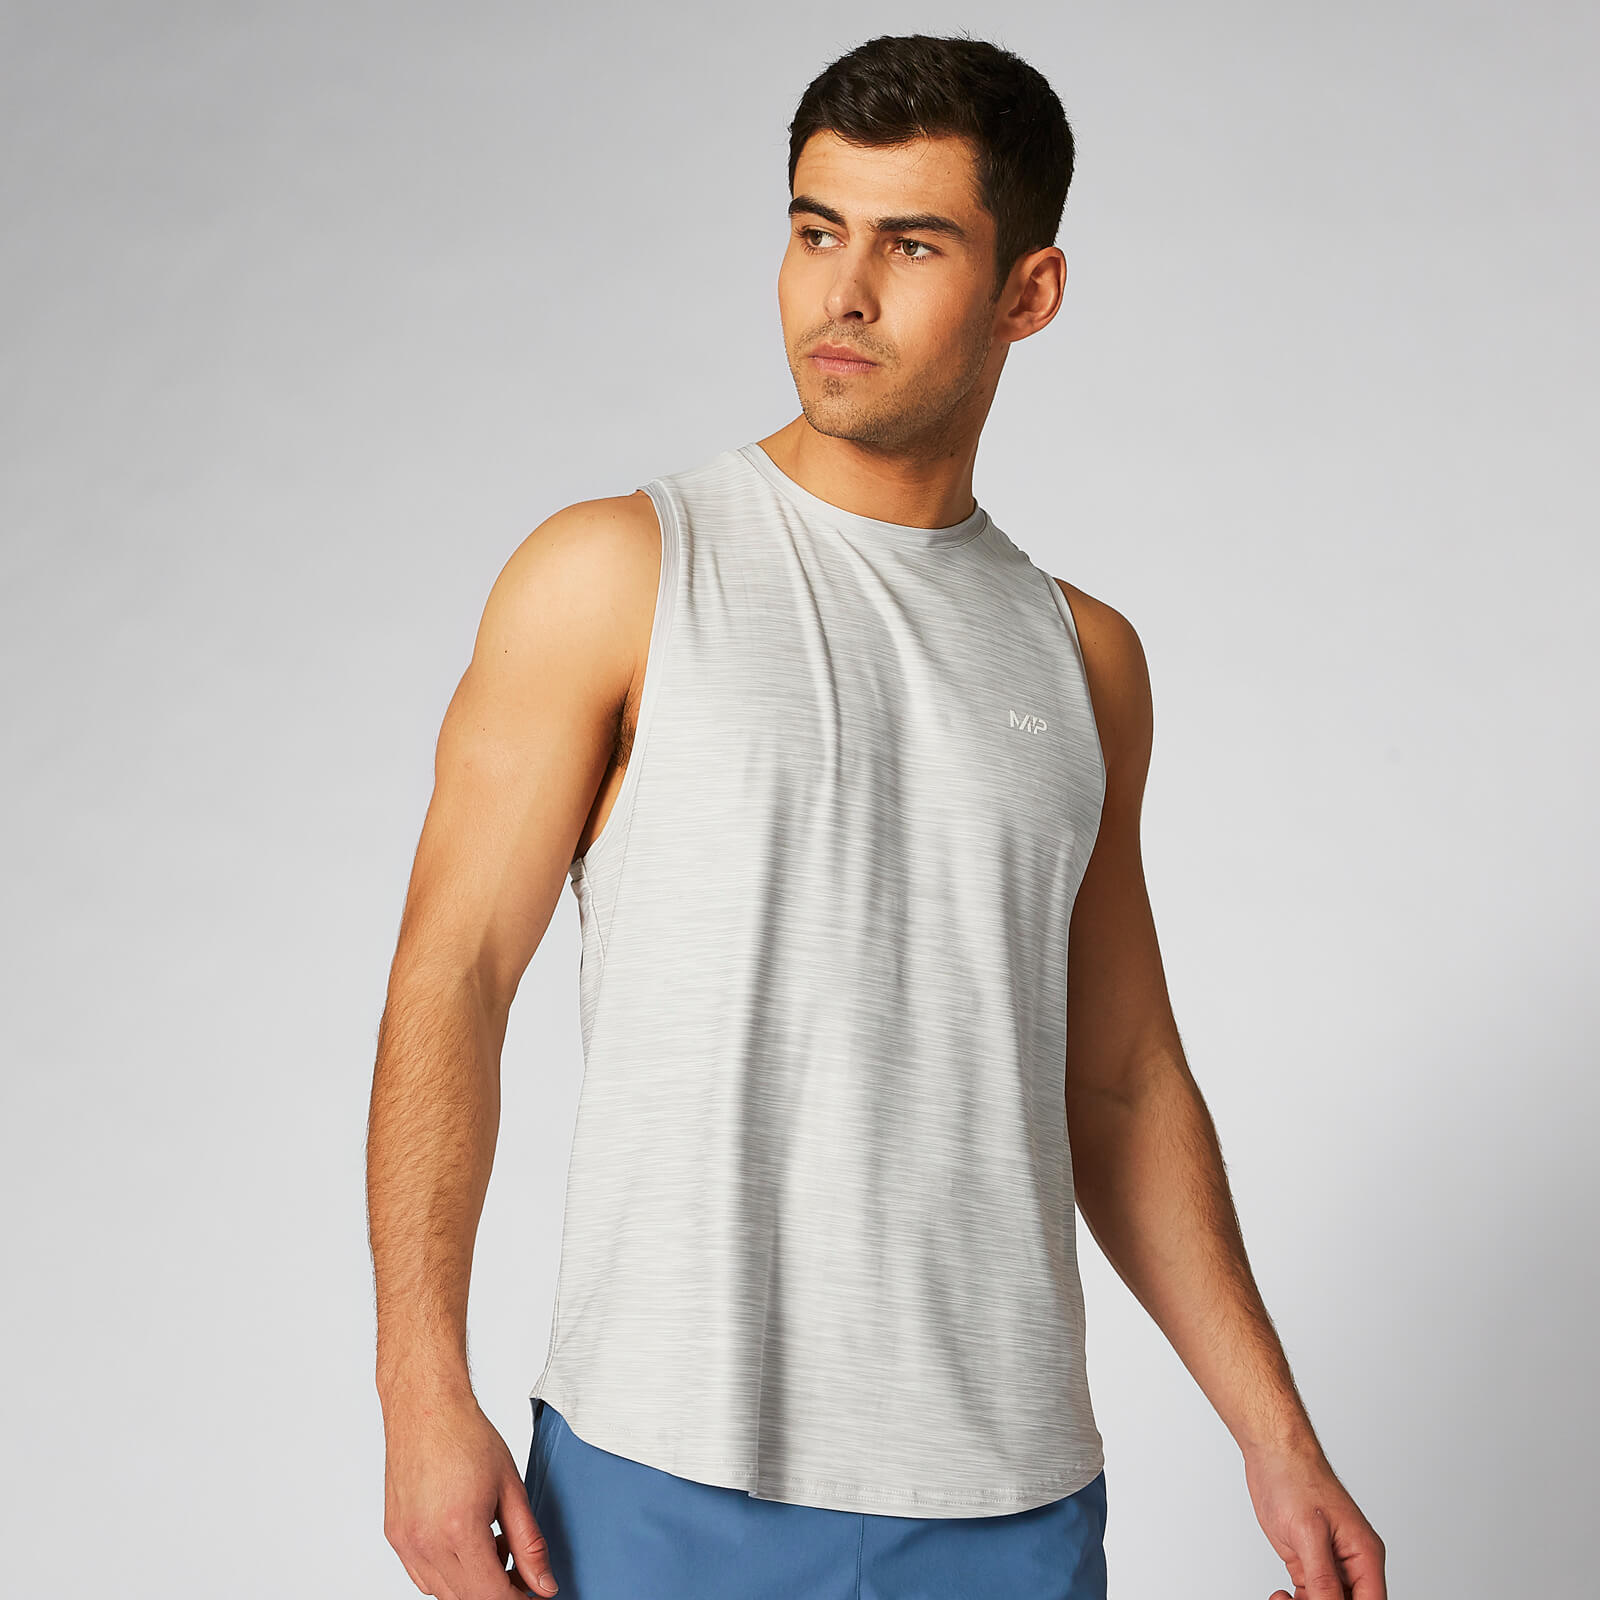 Myprotein Dry Tech Infinity Tank Top - Silver Marl